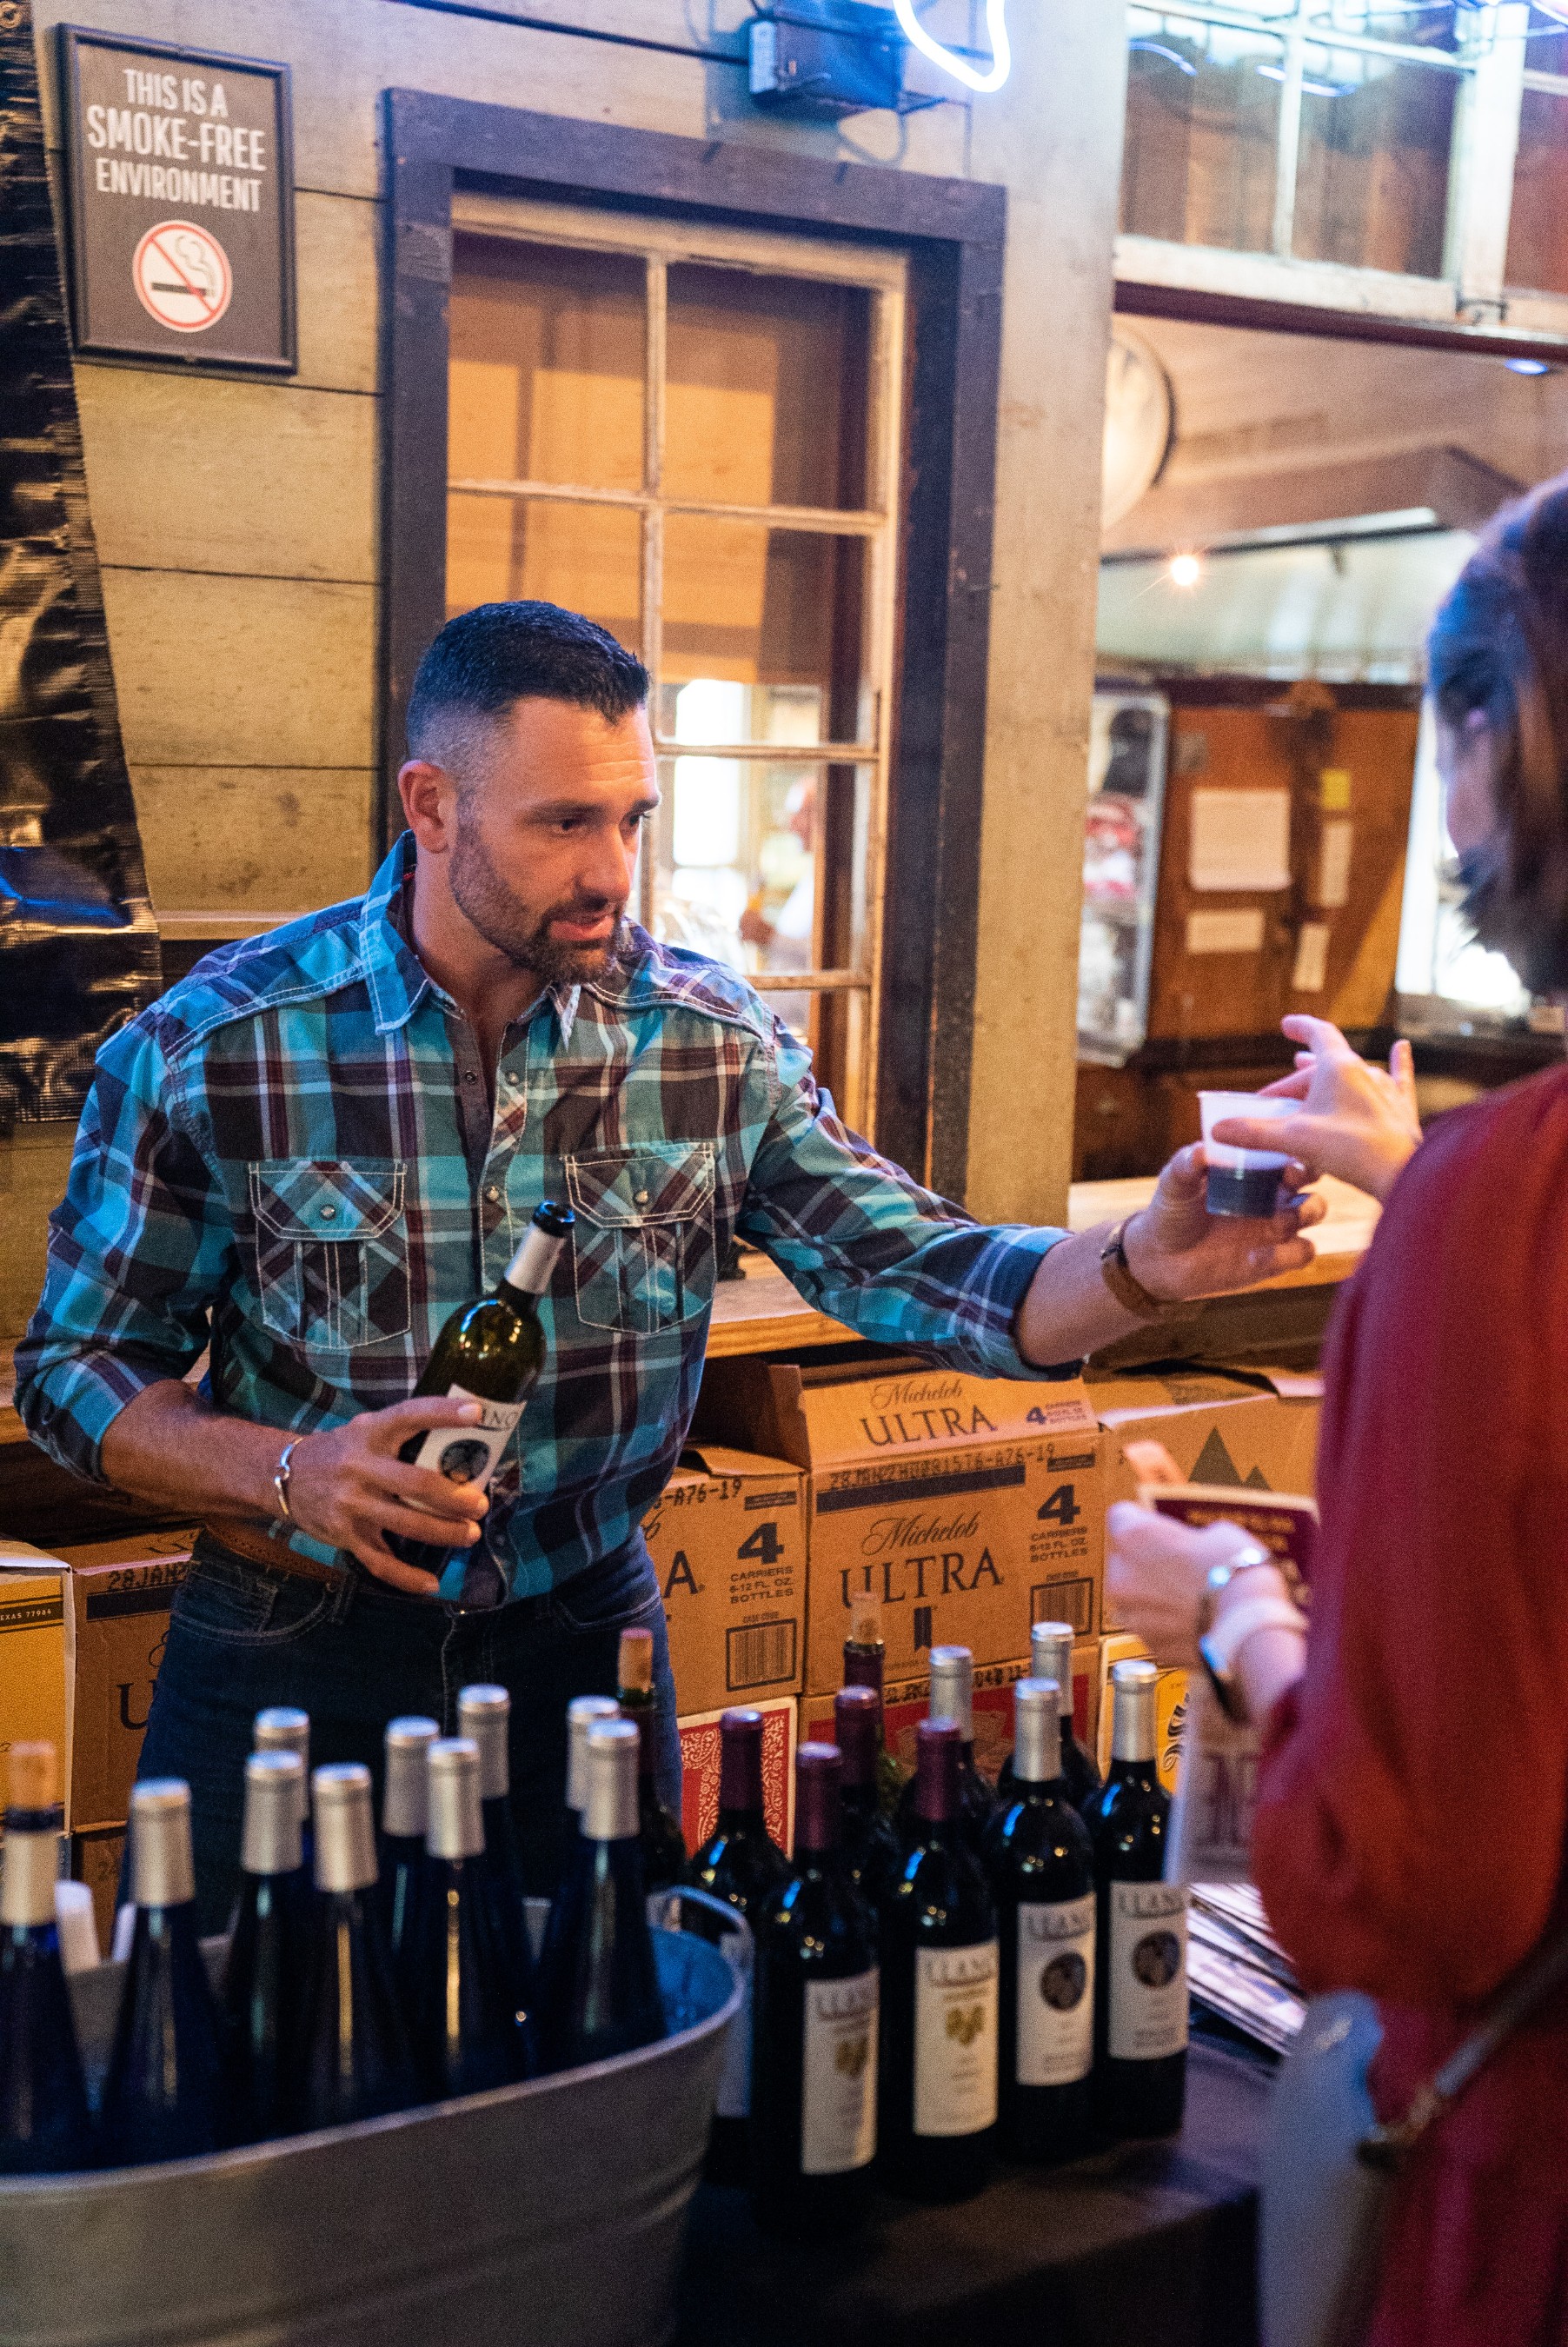 A server pours a glass of Llano Estacado wine at Gruene Hall during the Gruene Wine & Music Festival. The Grapevine in Gruene, which has one of the largest selections of Texas wines, hosts the annual festival each October.